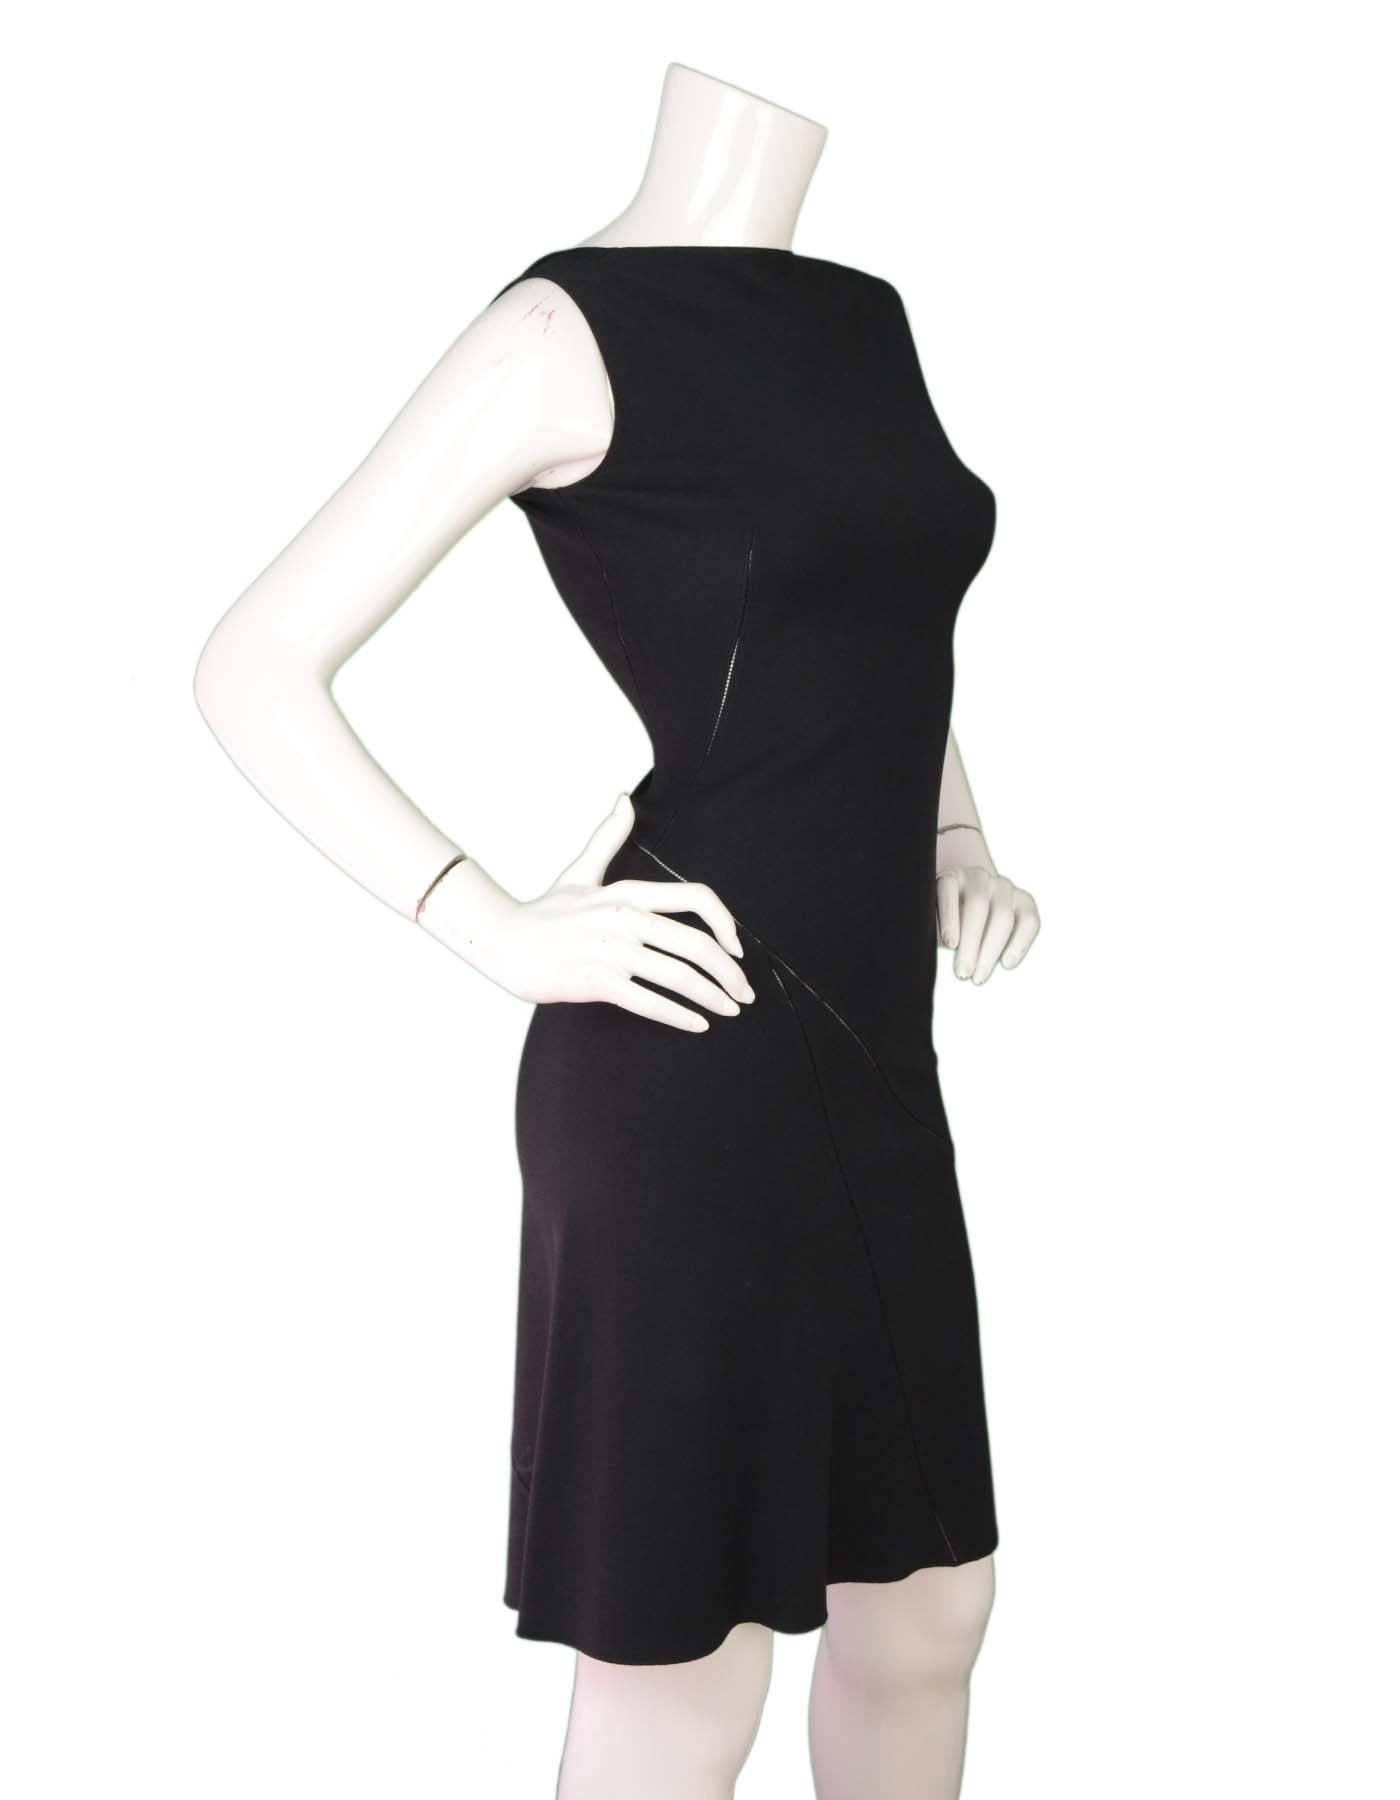 Alaia Black Sleeveless Fit Flare Dress
Features dip in back neckline
Made In: Italy
Color: Black
Composition: Silk blend textile (composition tags have faded)
Lining: None
Closure/Opening: Side zipper 
Exterior Pockets: None
Interior